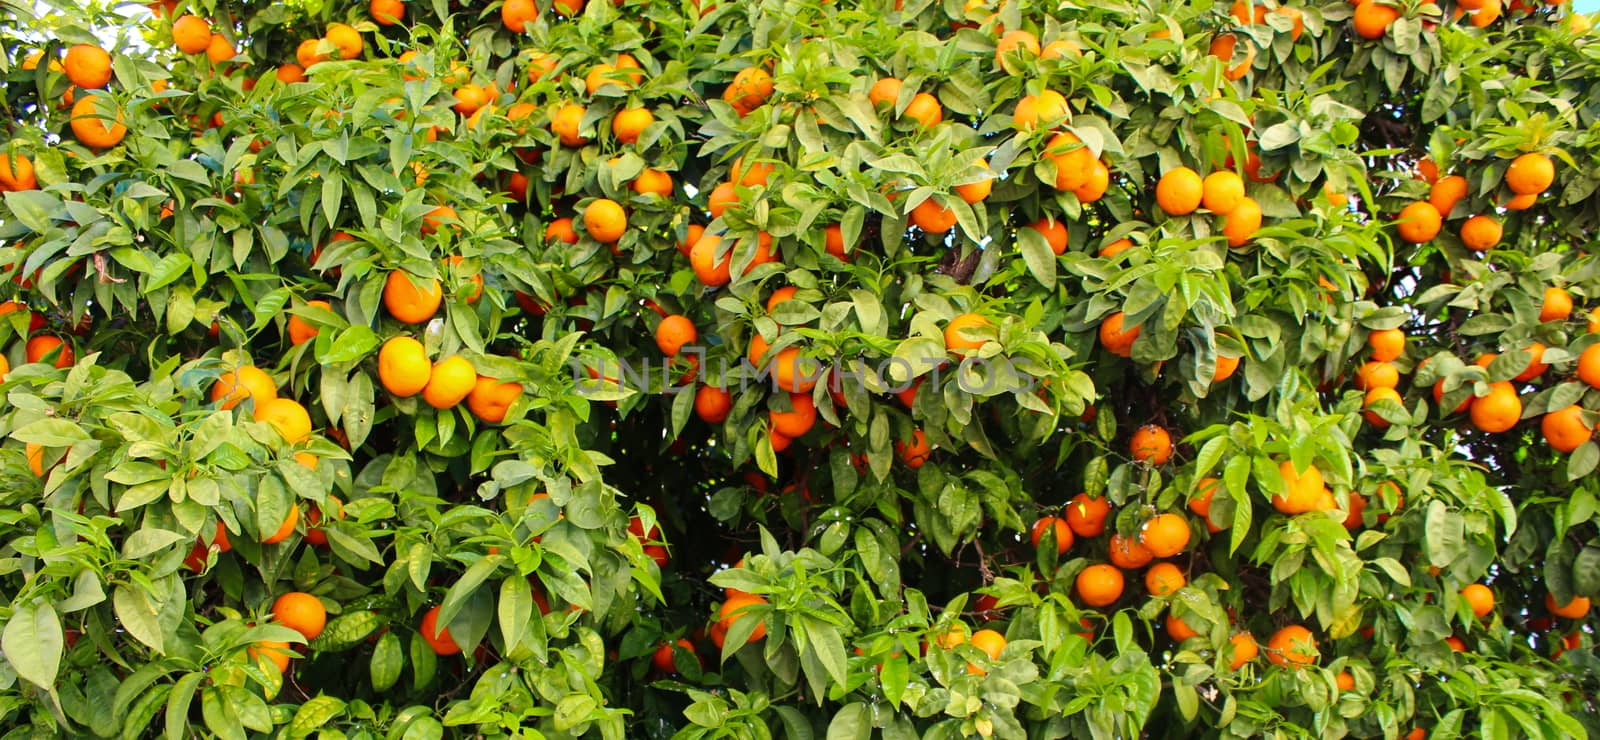 Banner of tree oranges or mandarins where there are a lot of leaves and a lot of fruit. Faro, Portugal.